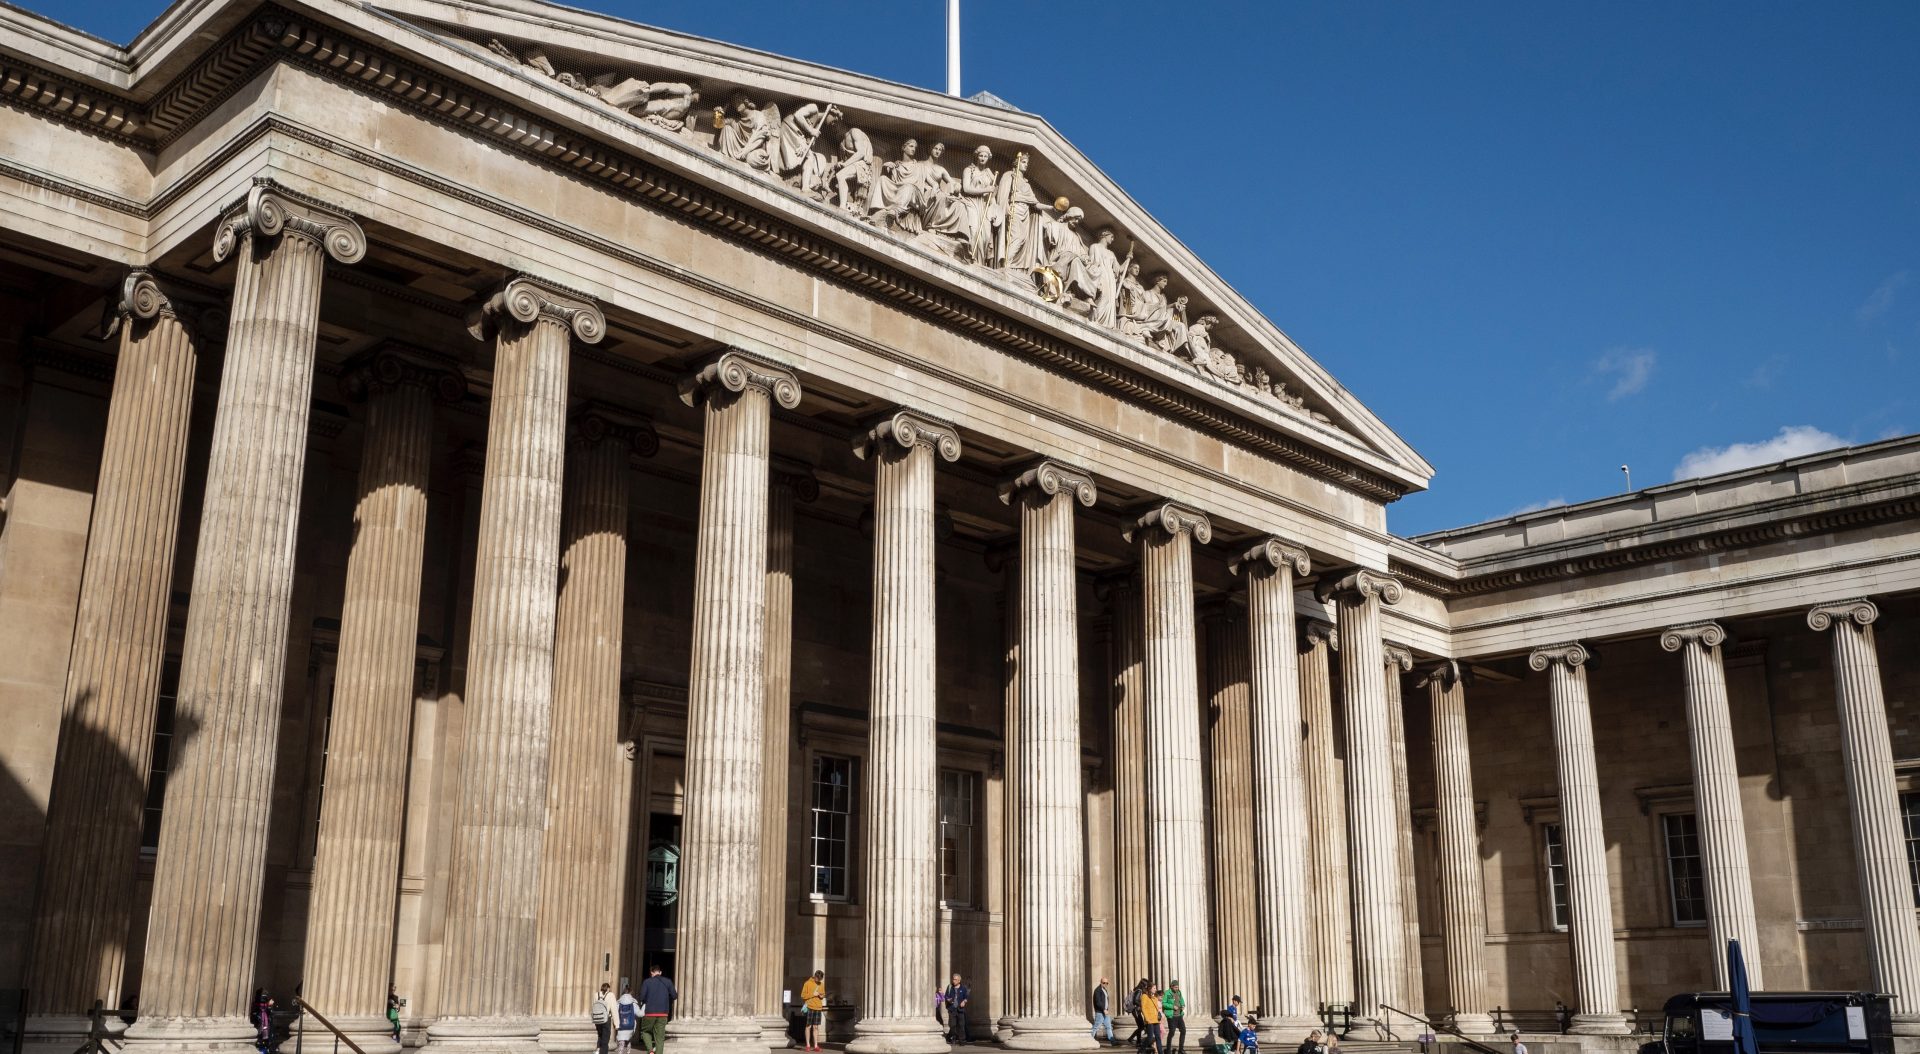 The Irony! British Museum Gets Called Out Online After Lamenting Its Treasures Being 'Stolen'